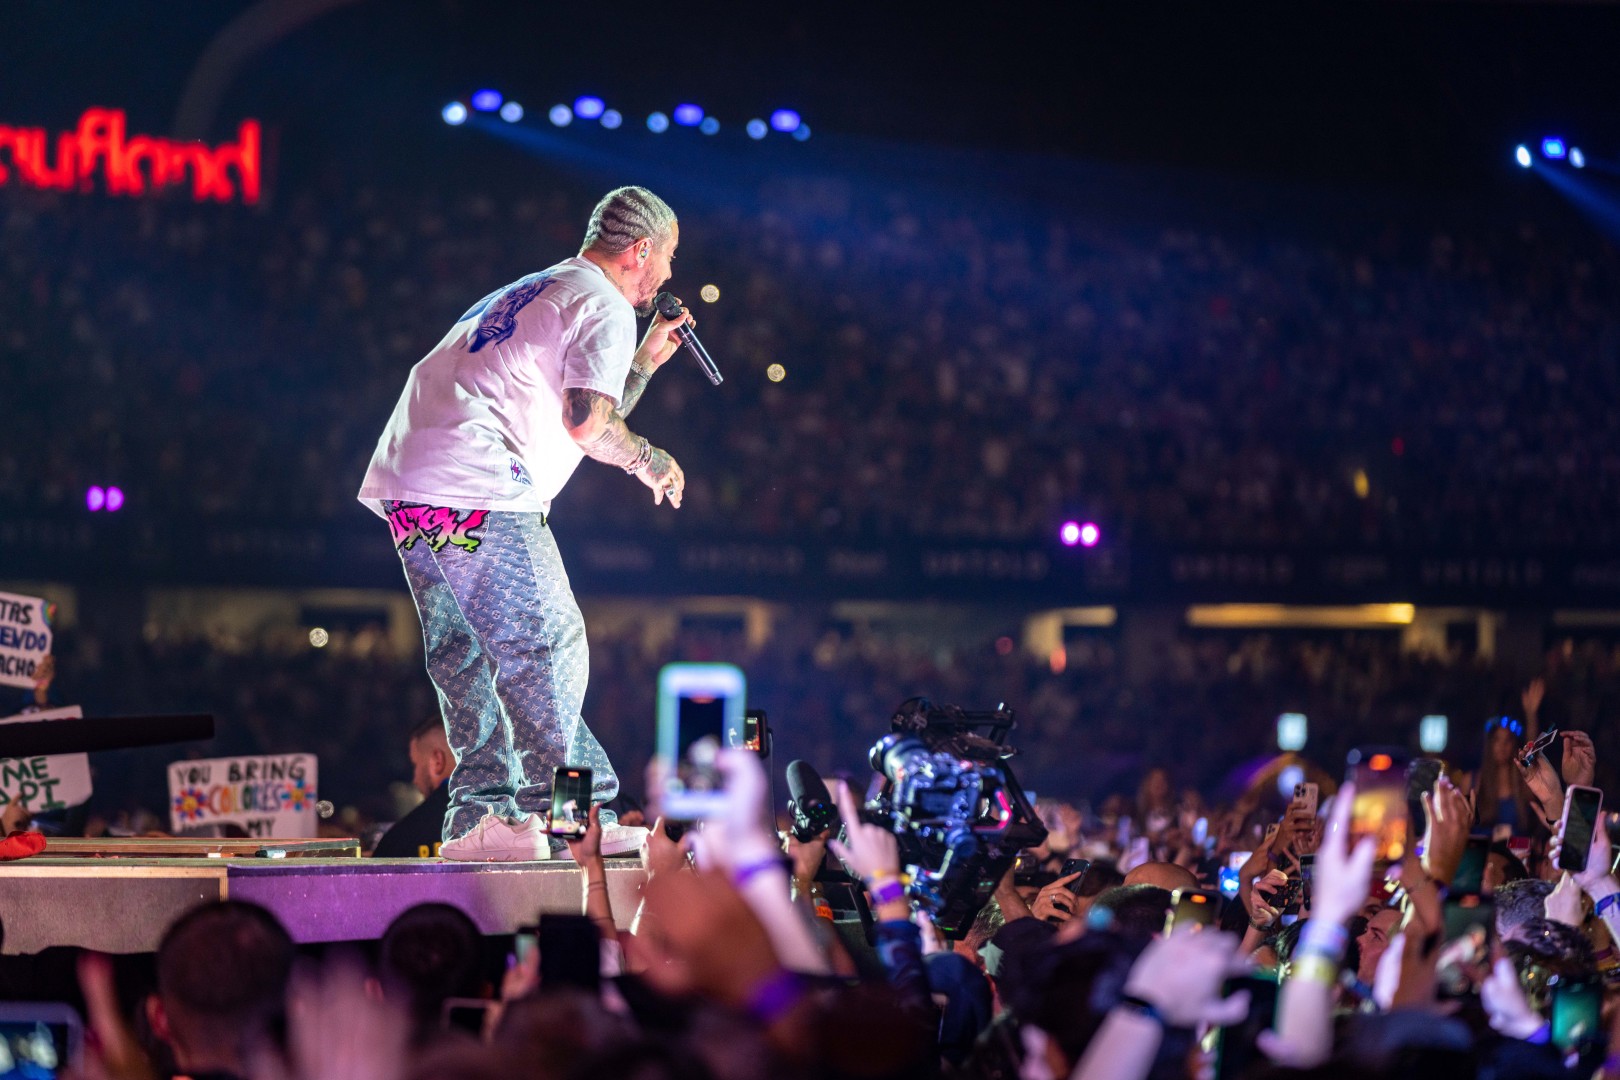 J Balvin at Cluj Arena in Cluj-Napoca on August 7, 2022 (e1496ea76c)